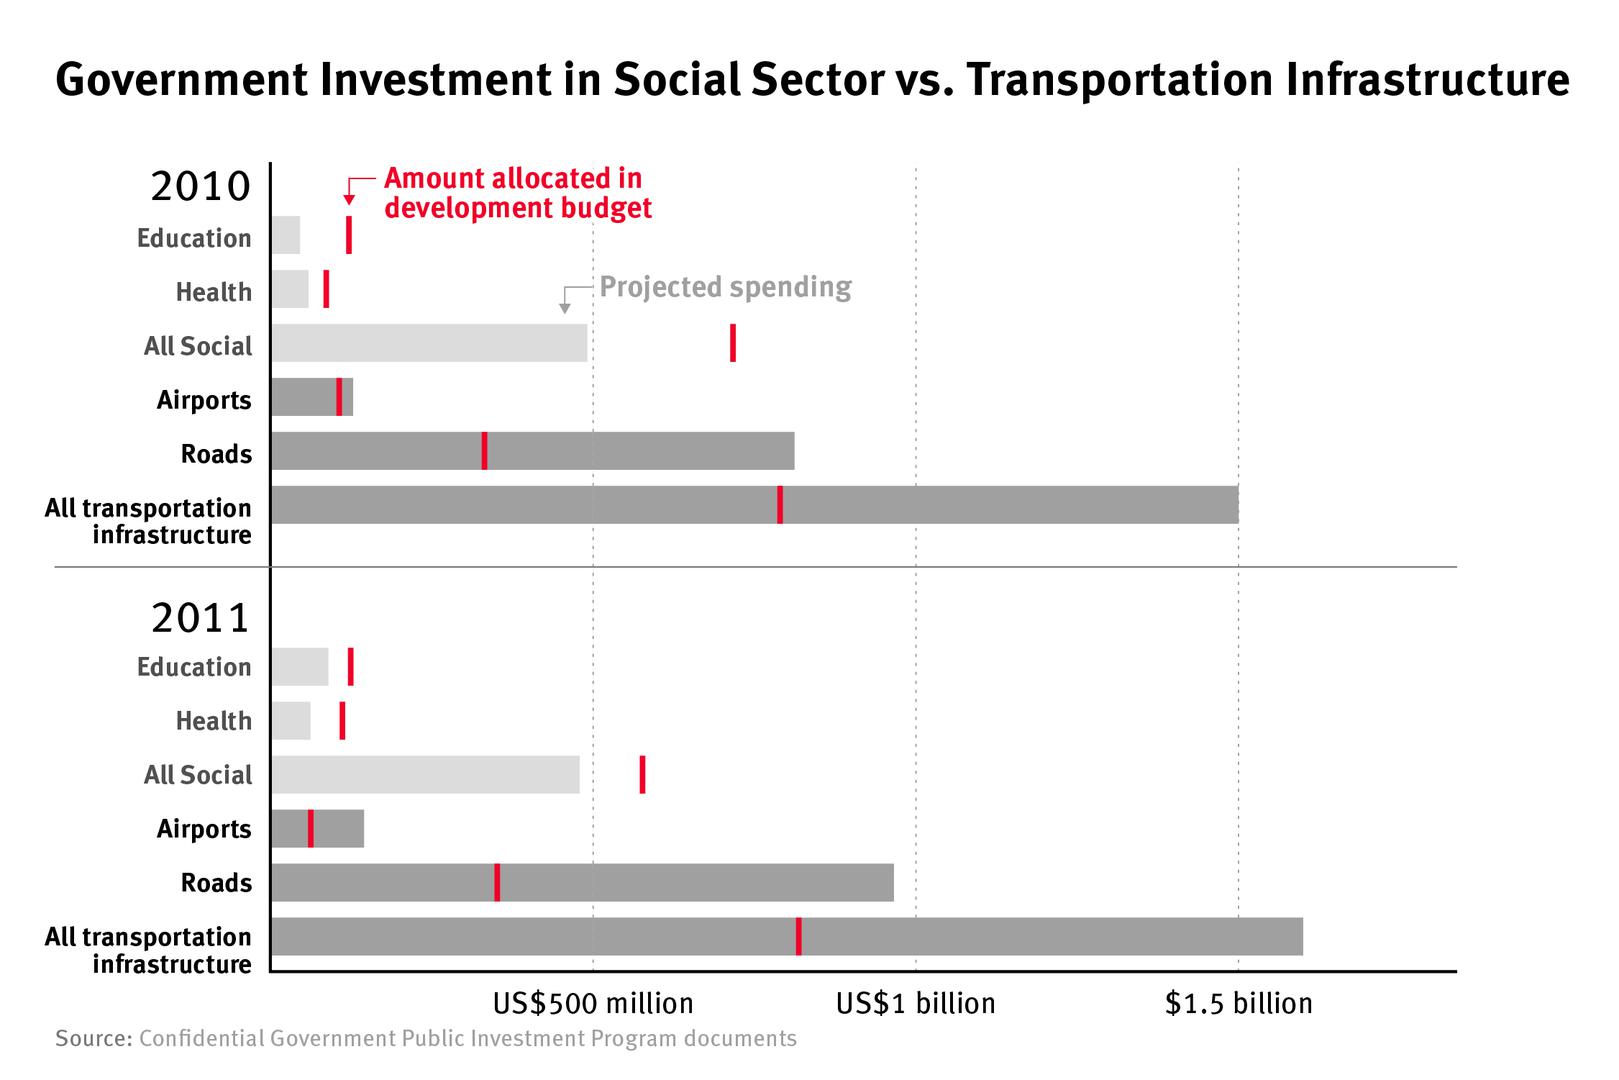 Government investment in social sector vs transportation infrastructure